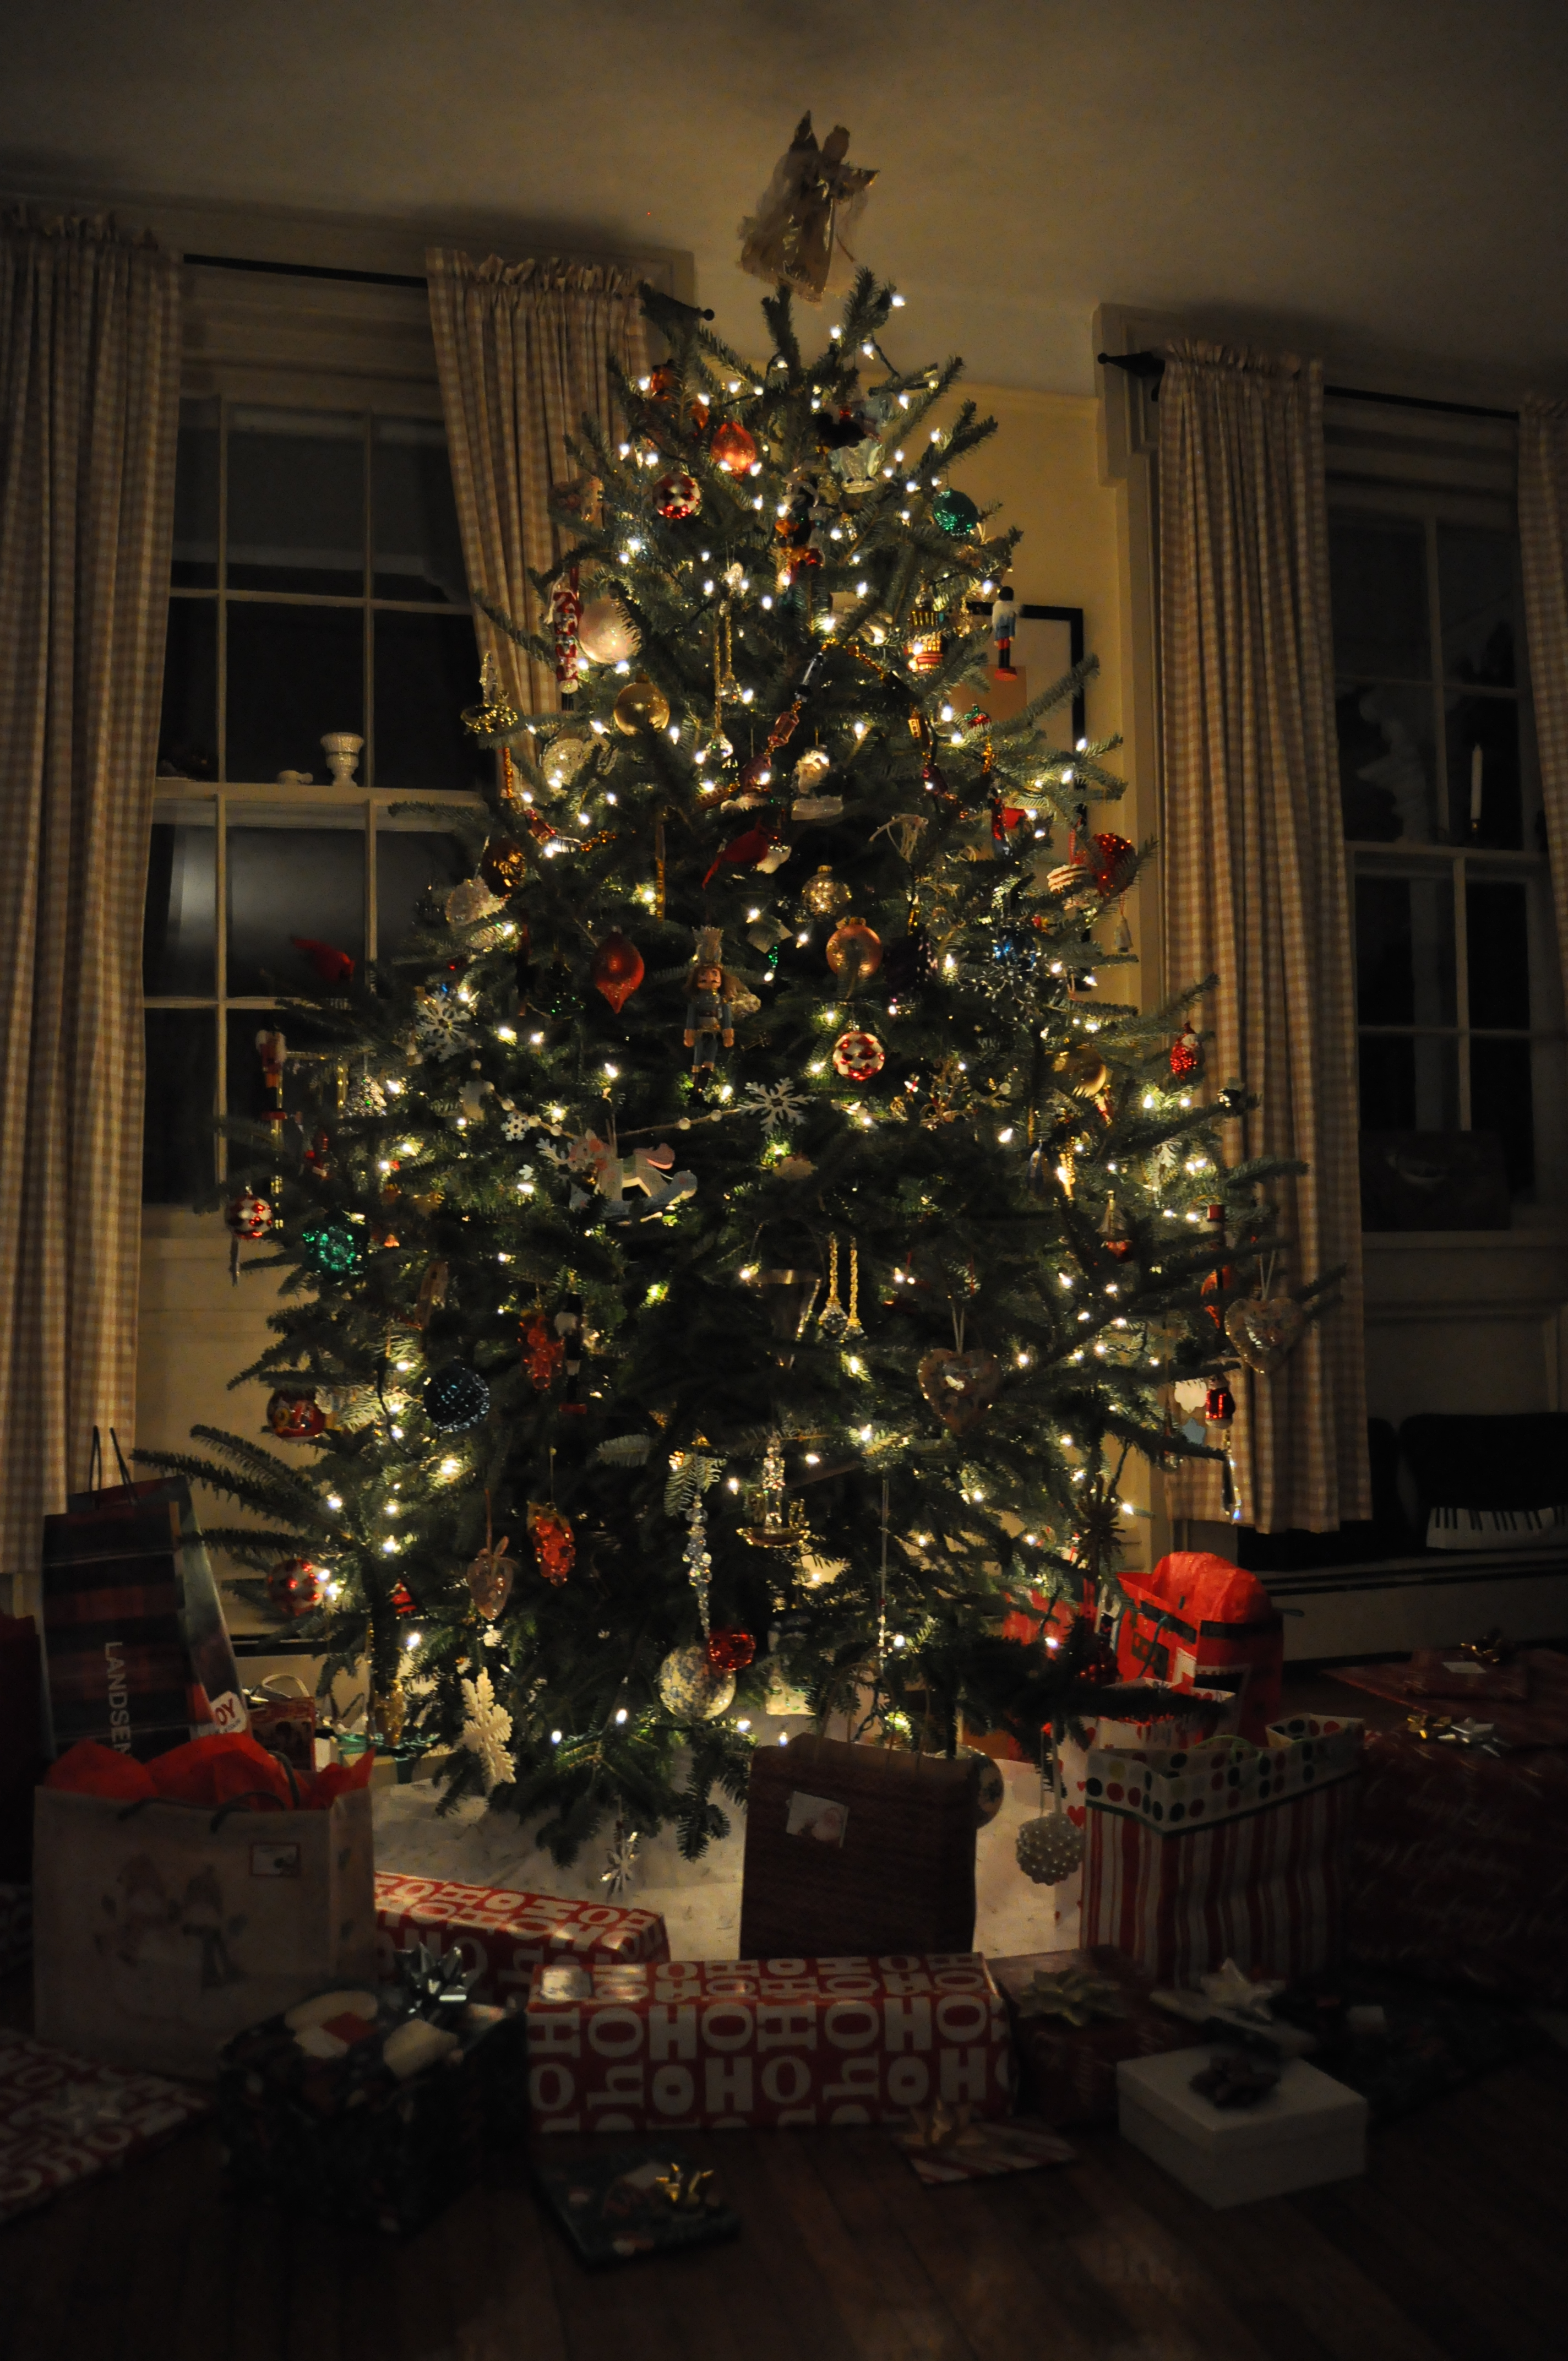 A Christmas tree in a living room is decorated with lights and ornaments with presents on the floor around it.